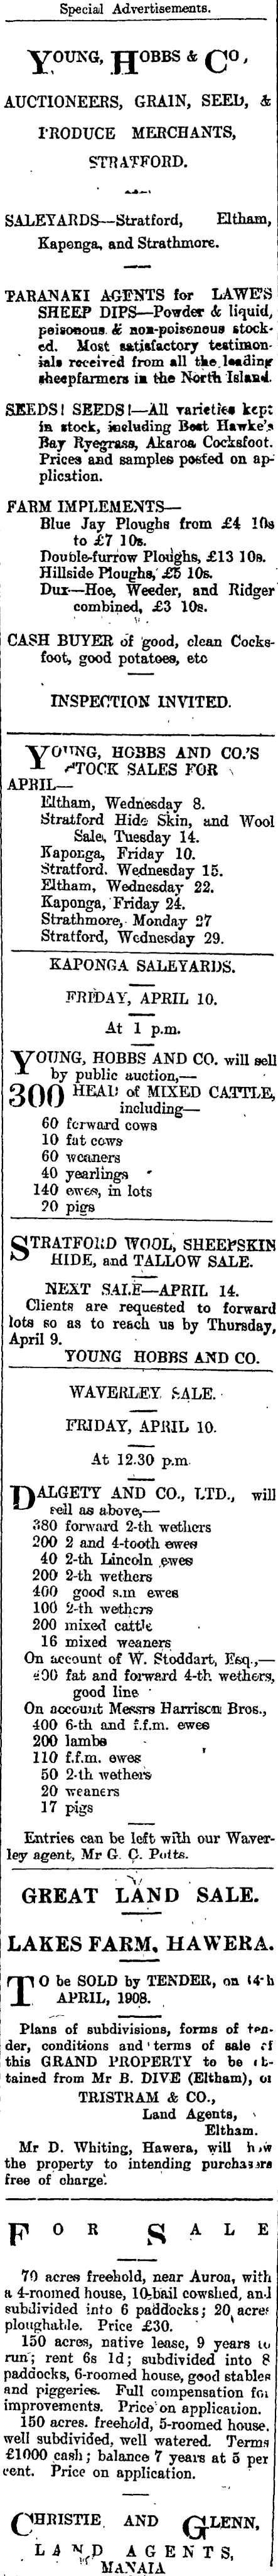 Papers Past Newspapers Hawera Normanby Star 9 April 1908 Page 8 Advertisements Column 1